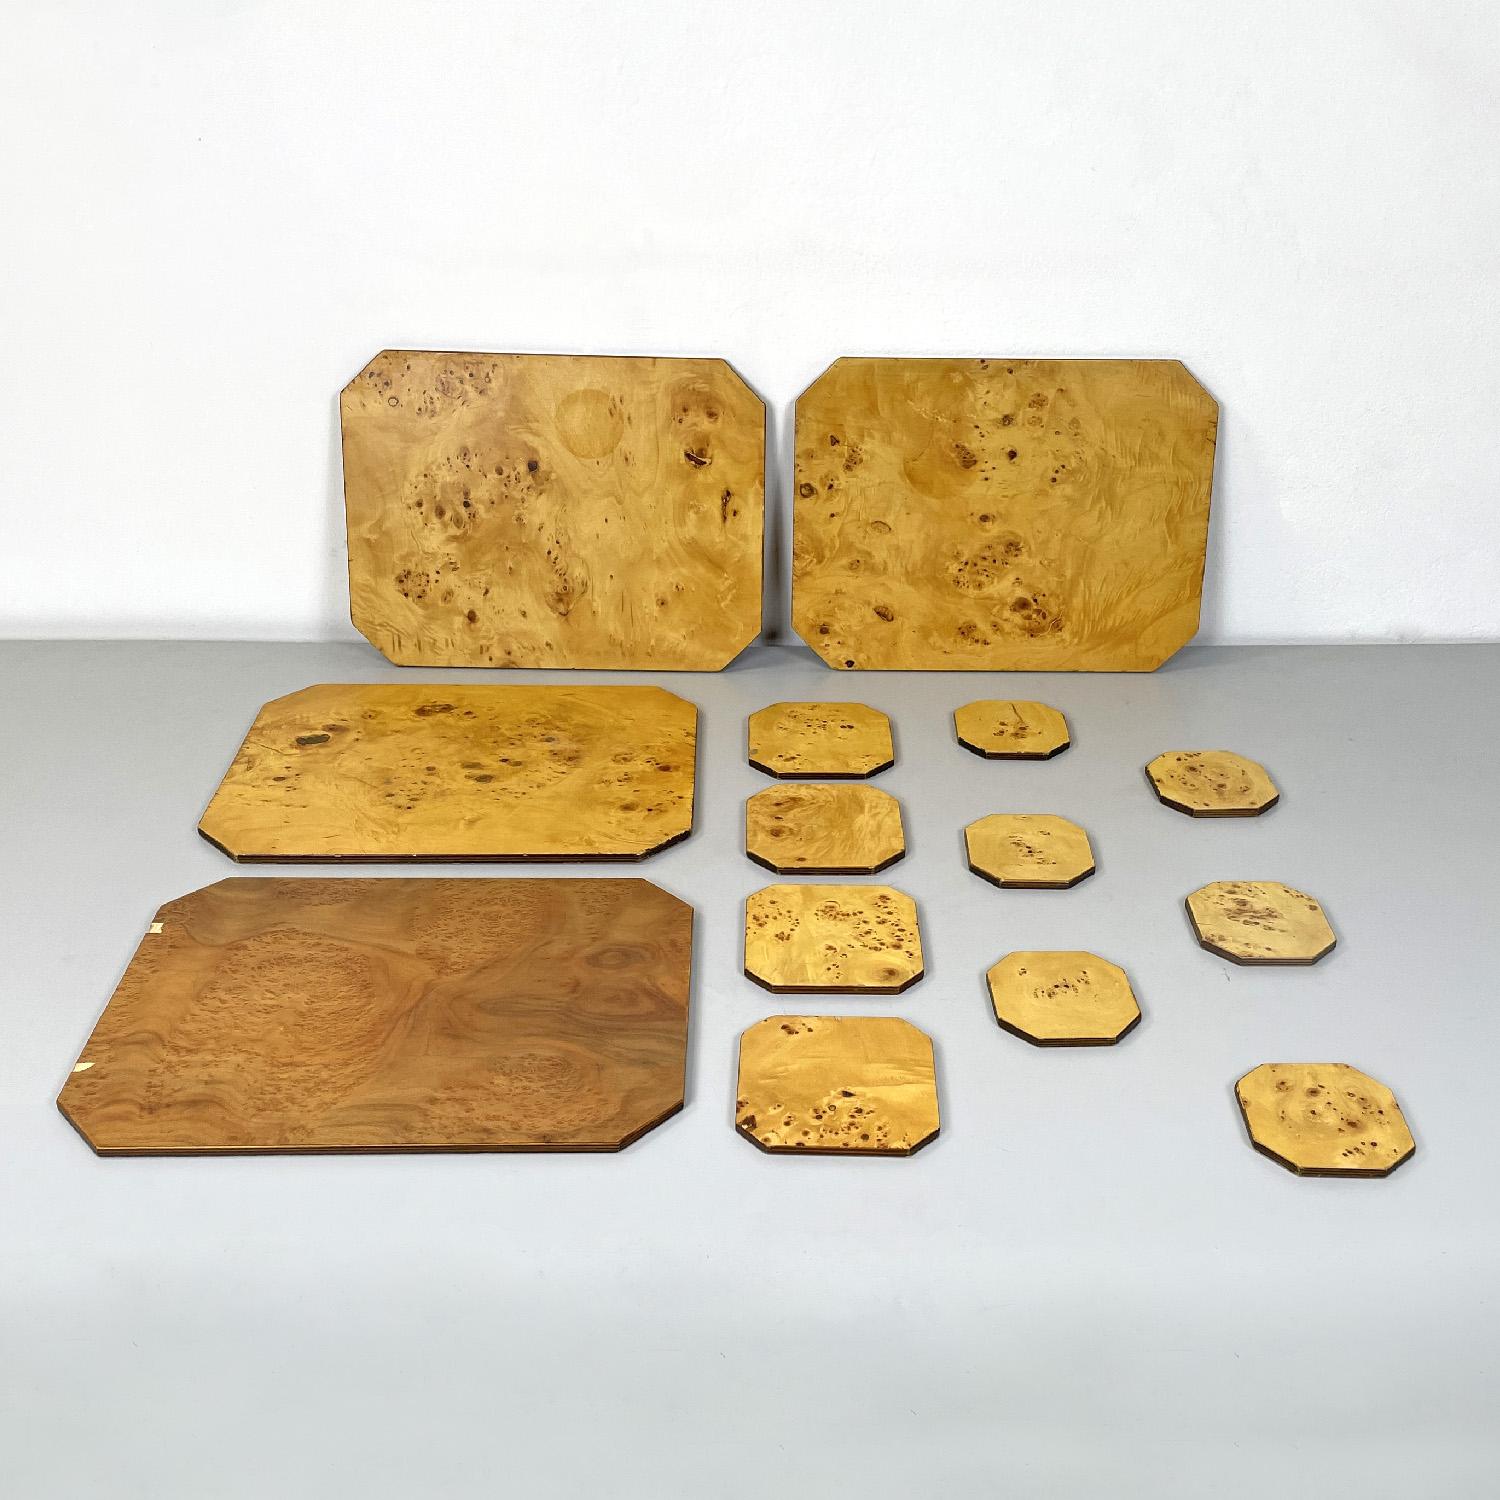 Italian modern wooden tableware set by Felice Antonio Botta Designer, 1973
Set of four placemats, four larger coasters and six smaller coasters all in wood. All elements of the set have cut corners. One of the four larger placemats is different from